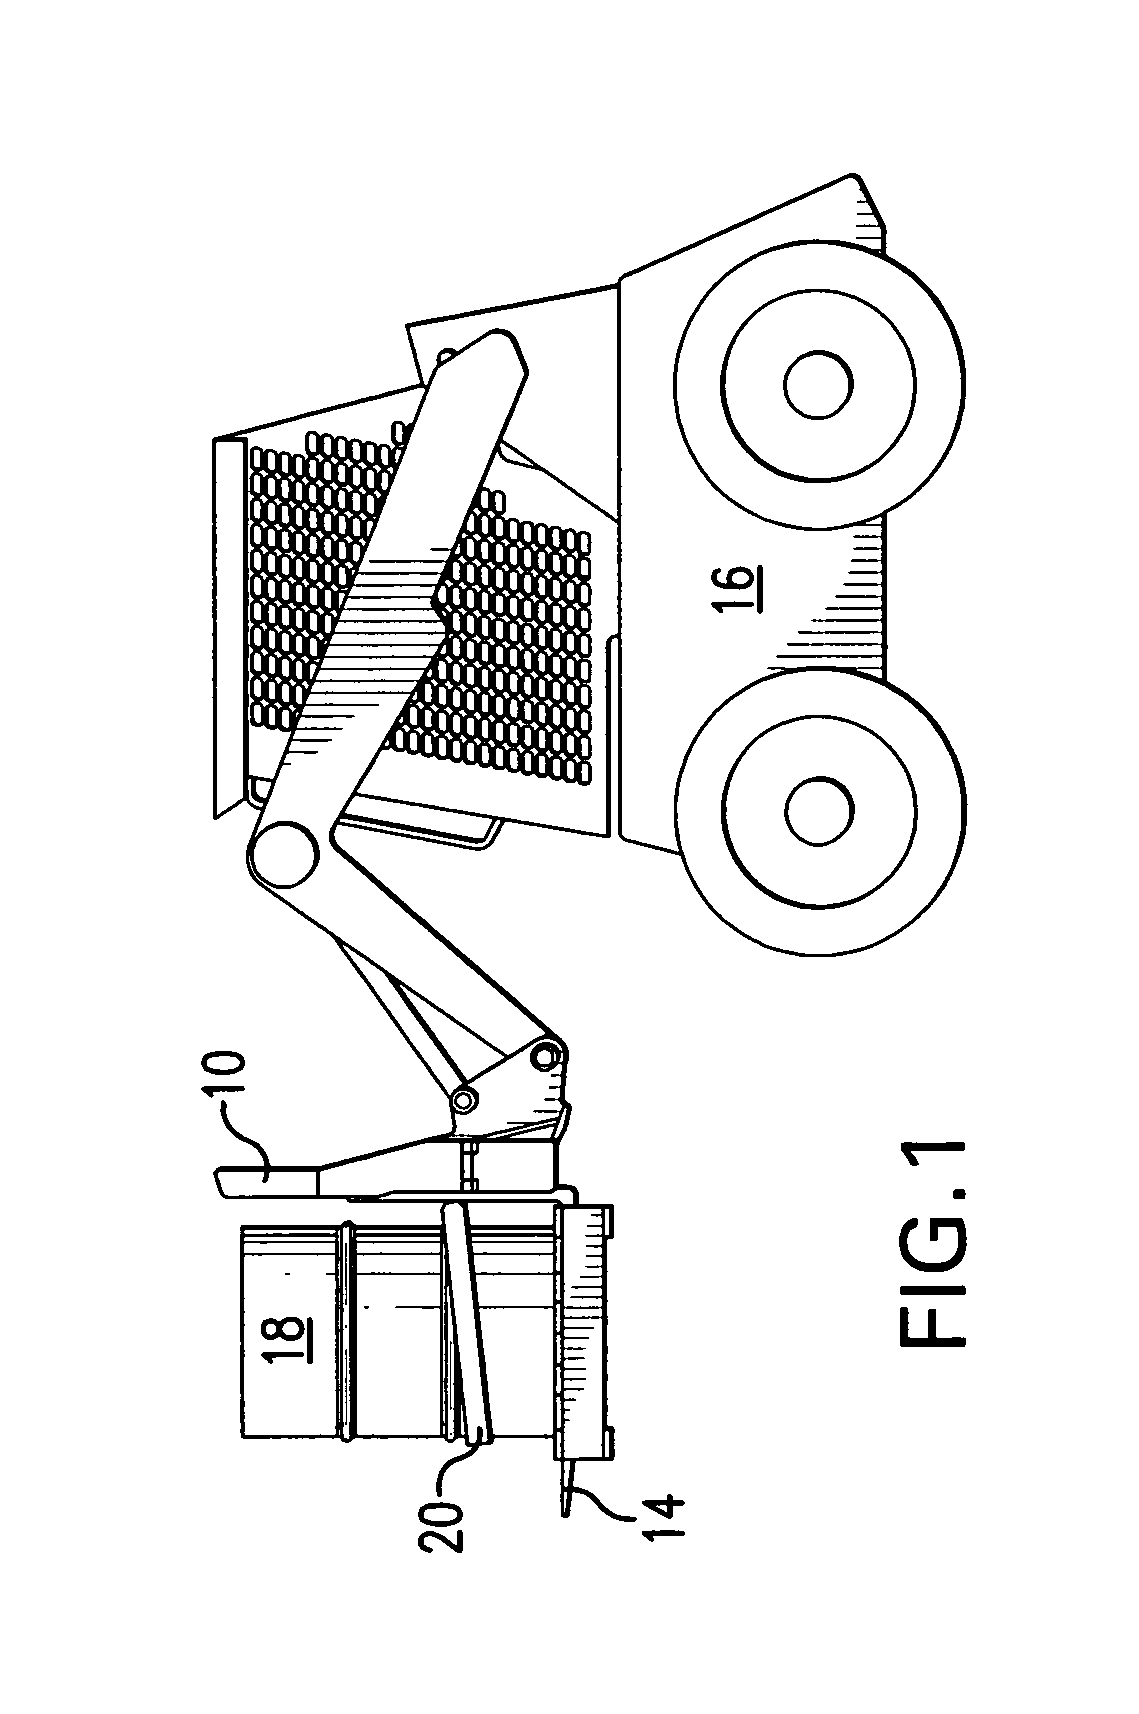 Pallet fork carriage with a load securing D-ring and method of using